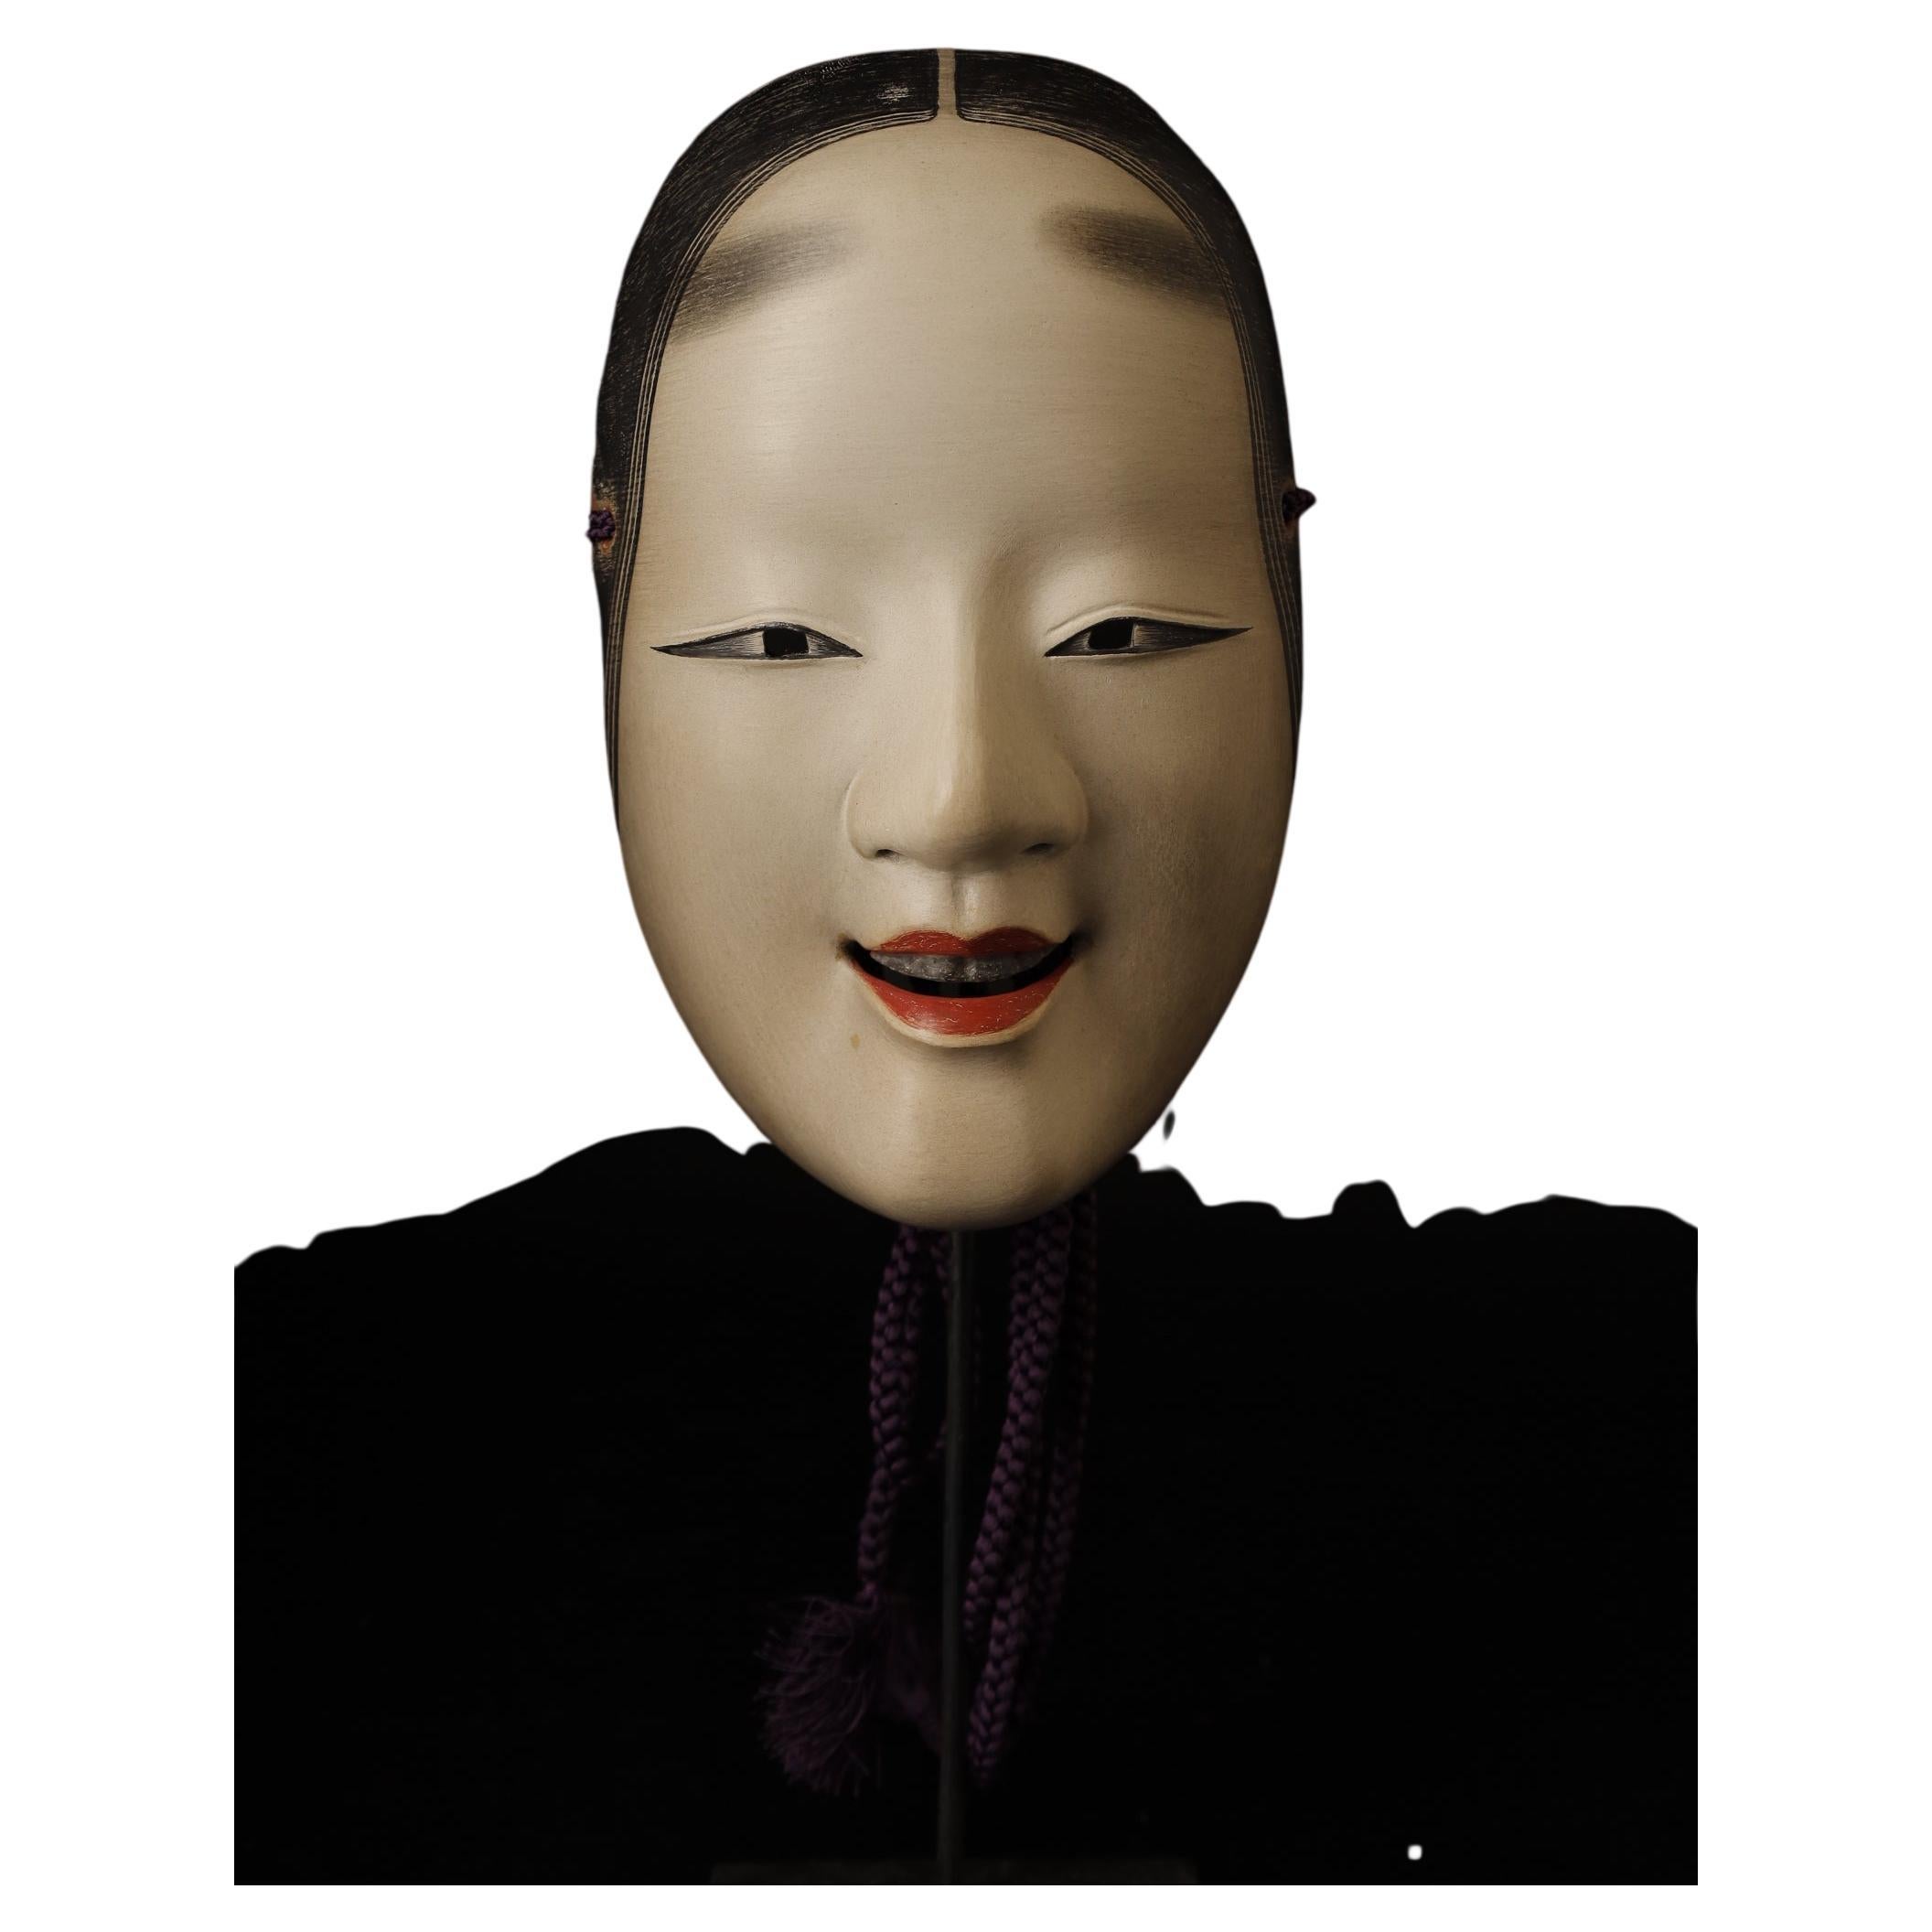 Very High-Quality Noh Mask Depicting Koomote Character of a Young Woman

This very high-quality Noh mask depicts the Koomote character of a young woman who is not yet twenty. It was carved by master carver Nomura Ran, who is known for his fine masks